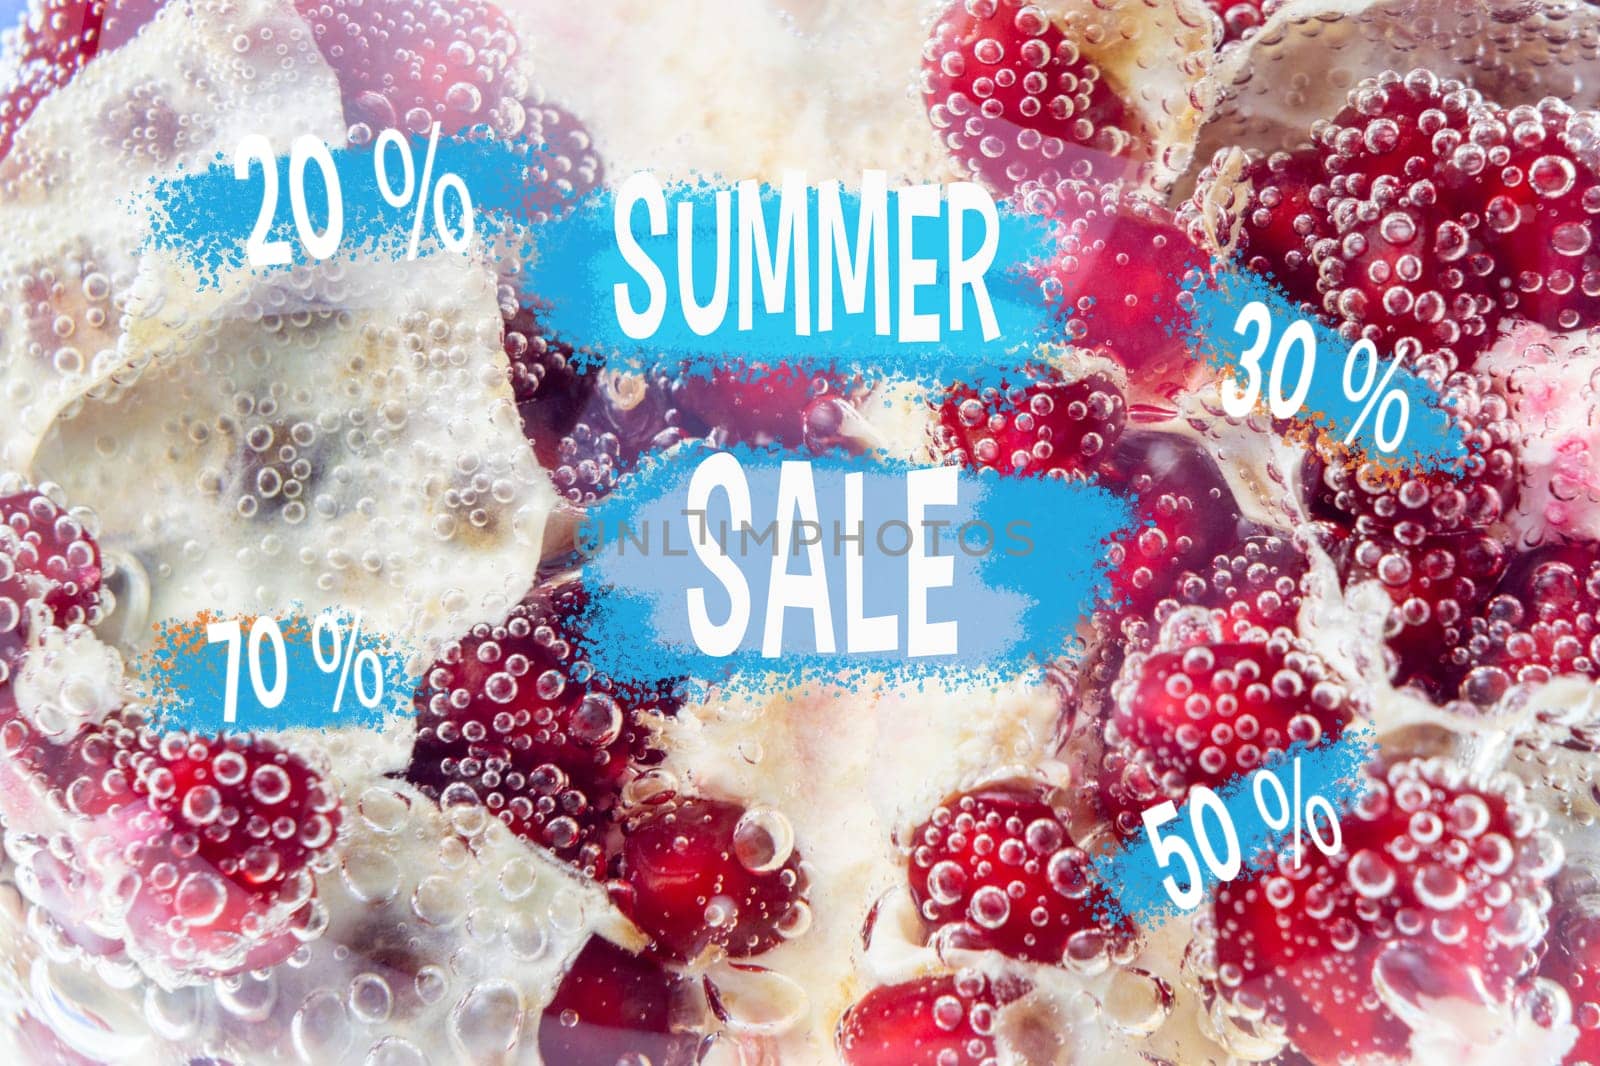 Summer with a tantalizing display of effervescent bubbles text announcing exciting seasonal sale percentages.